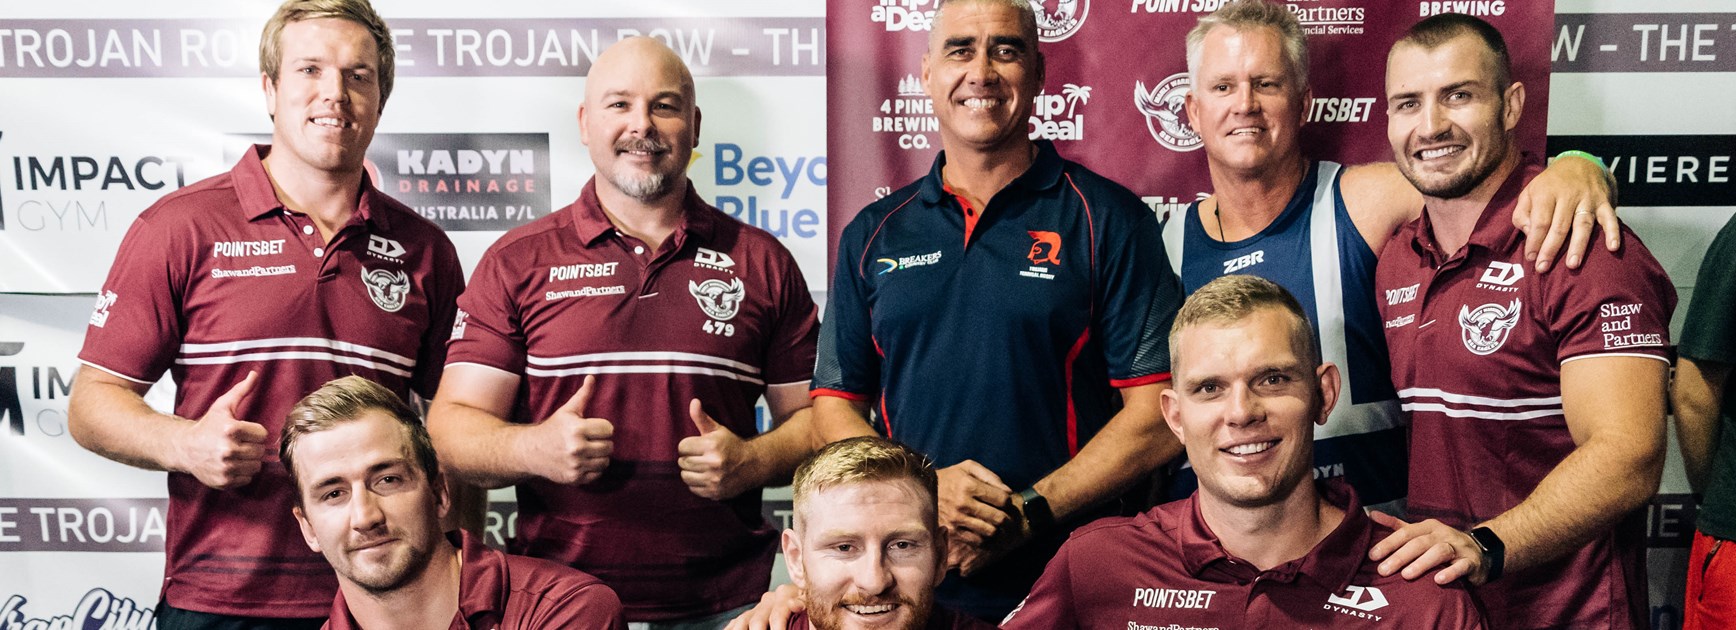 Sea Eagles proud to support Trojan Row charity event